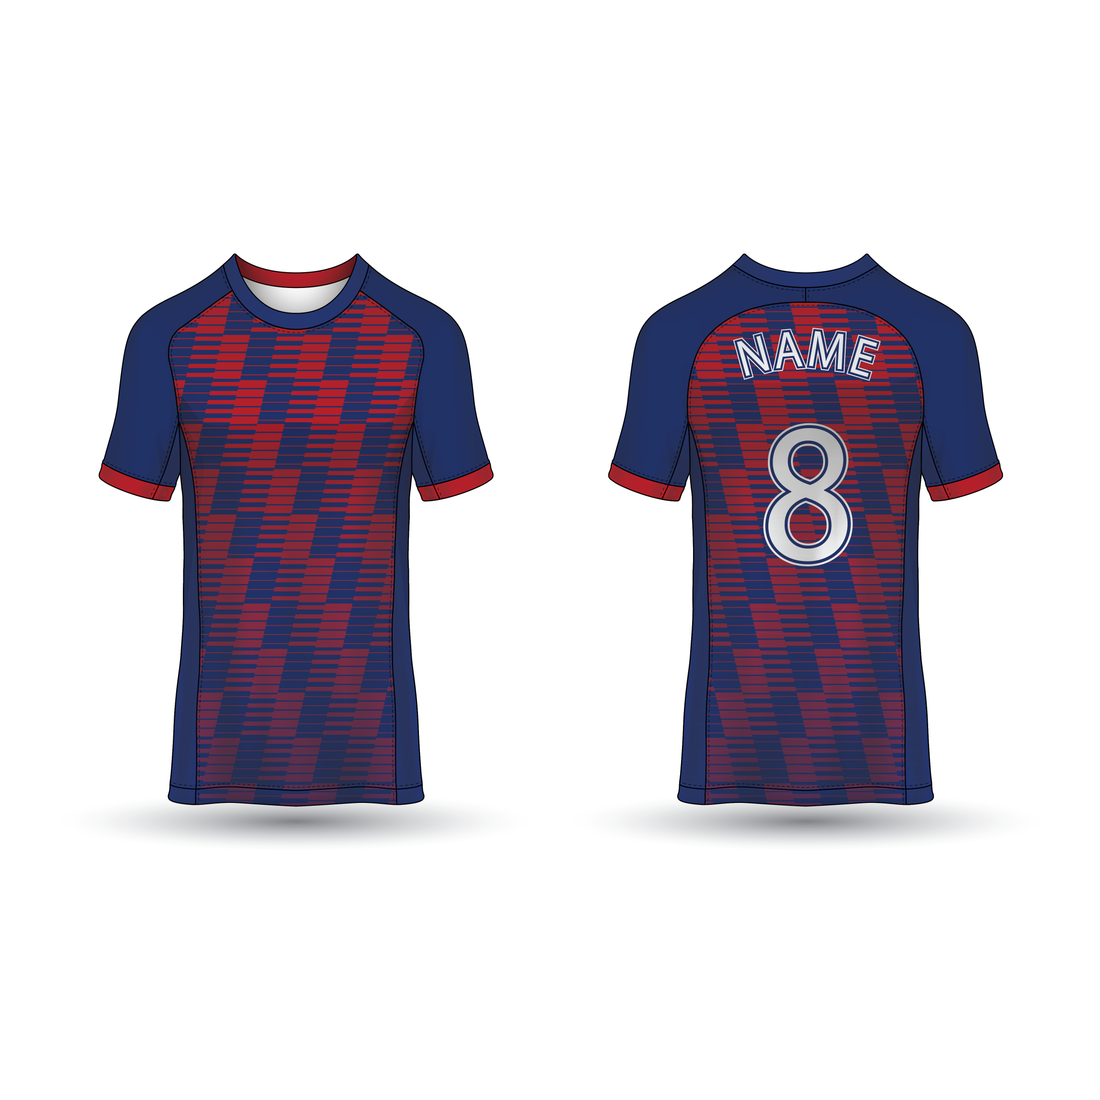 NEXT PRINT All Over Printed Customized Sublimation T-Shirt Unisex Sports Jersey Player Name & Number, Team Name NP50000243